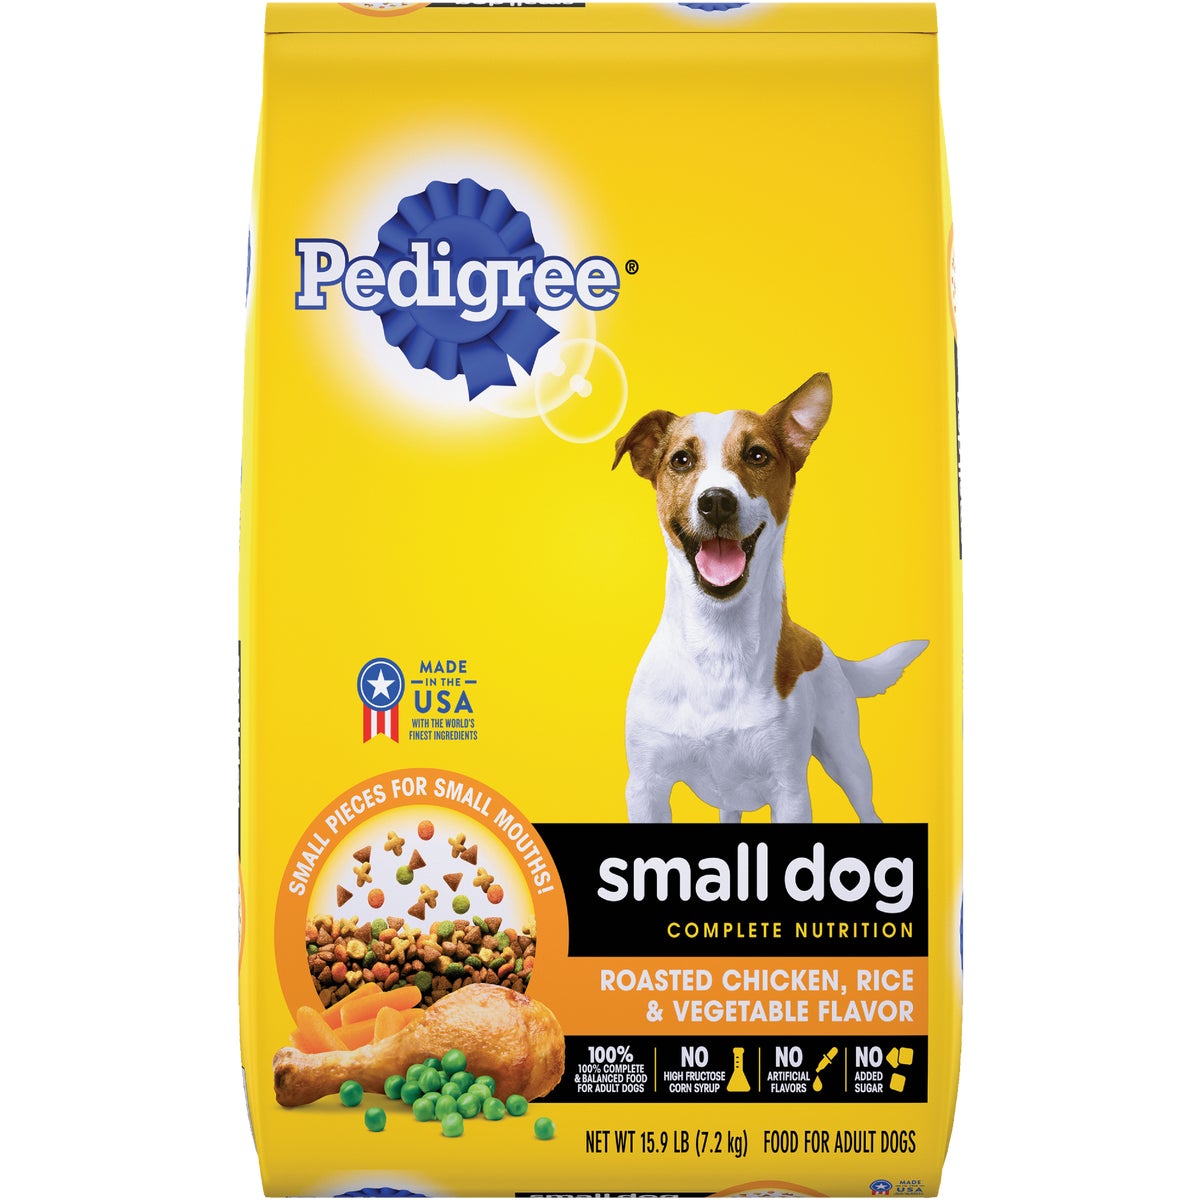 Pedigree Small Dog Complete Nutrition 15.9 Lb. Roasted Chicken, Rice, & Vegetable Adult Dry Dog Food